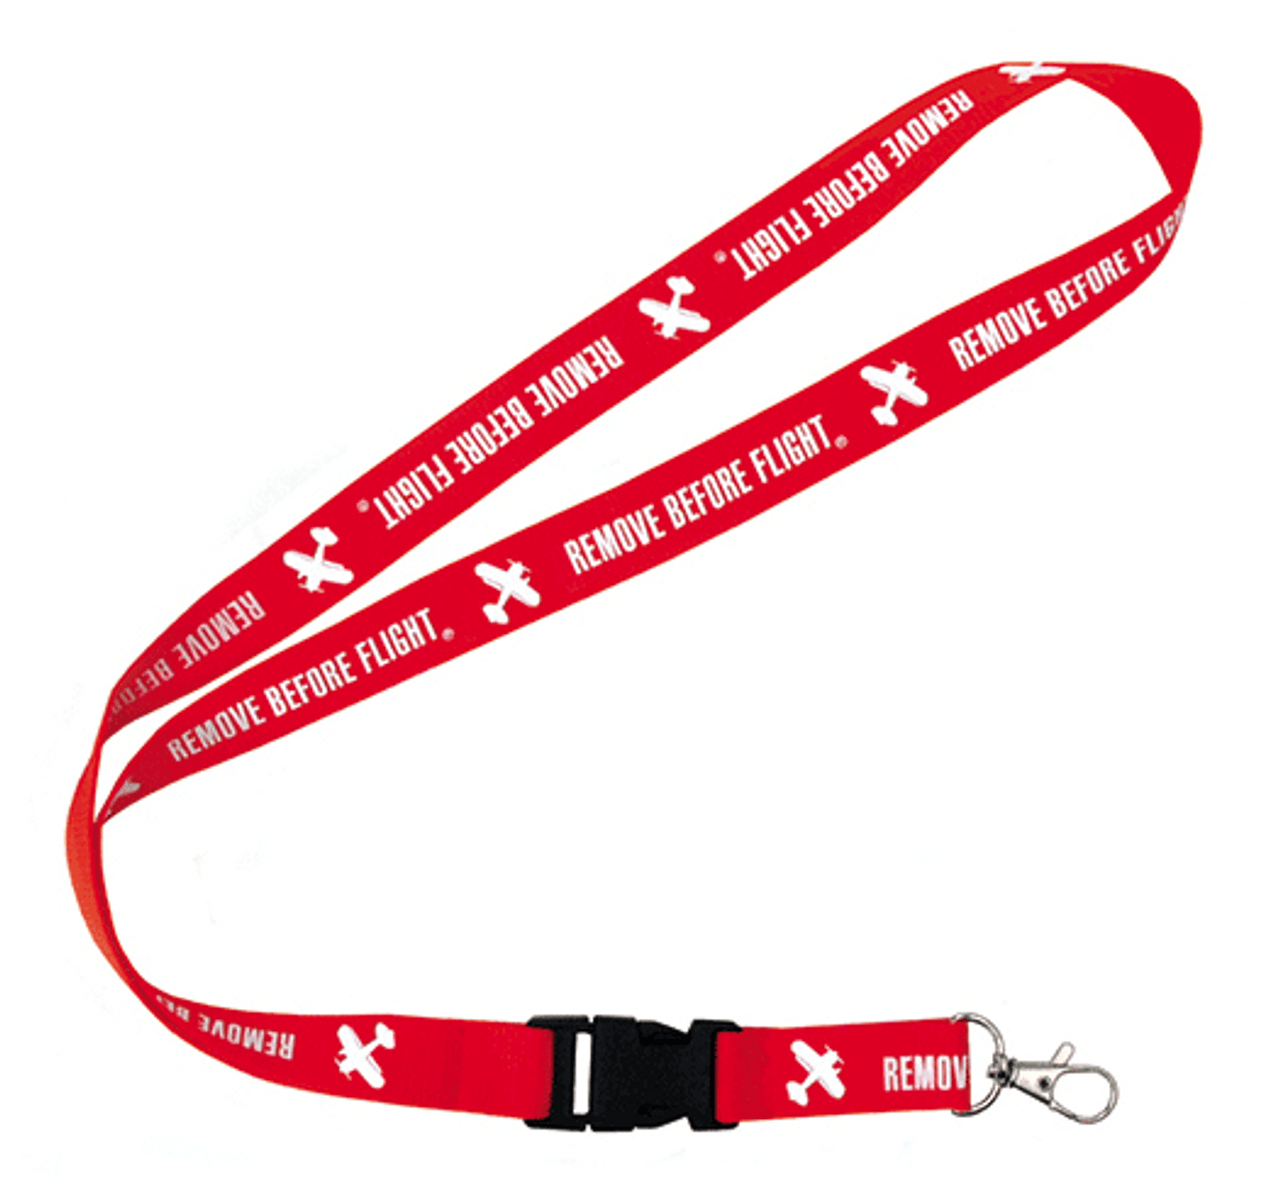 Remove Before Flight Lanyard with Removable key chain